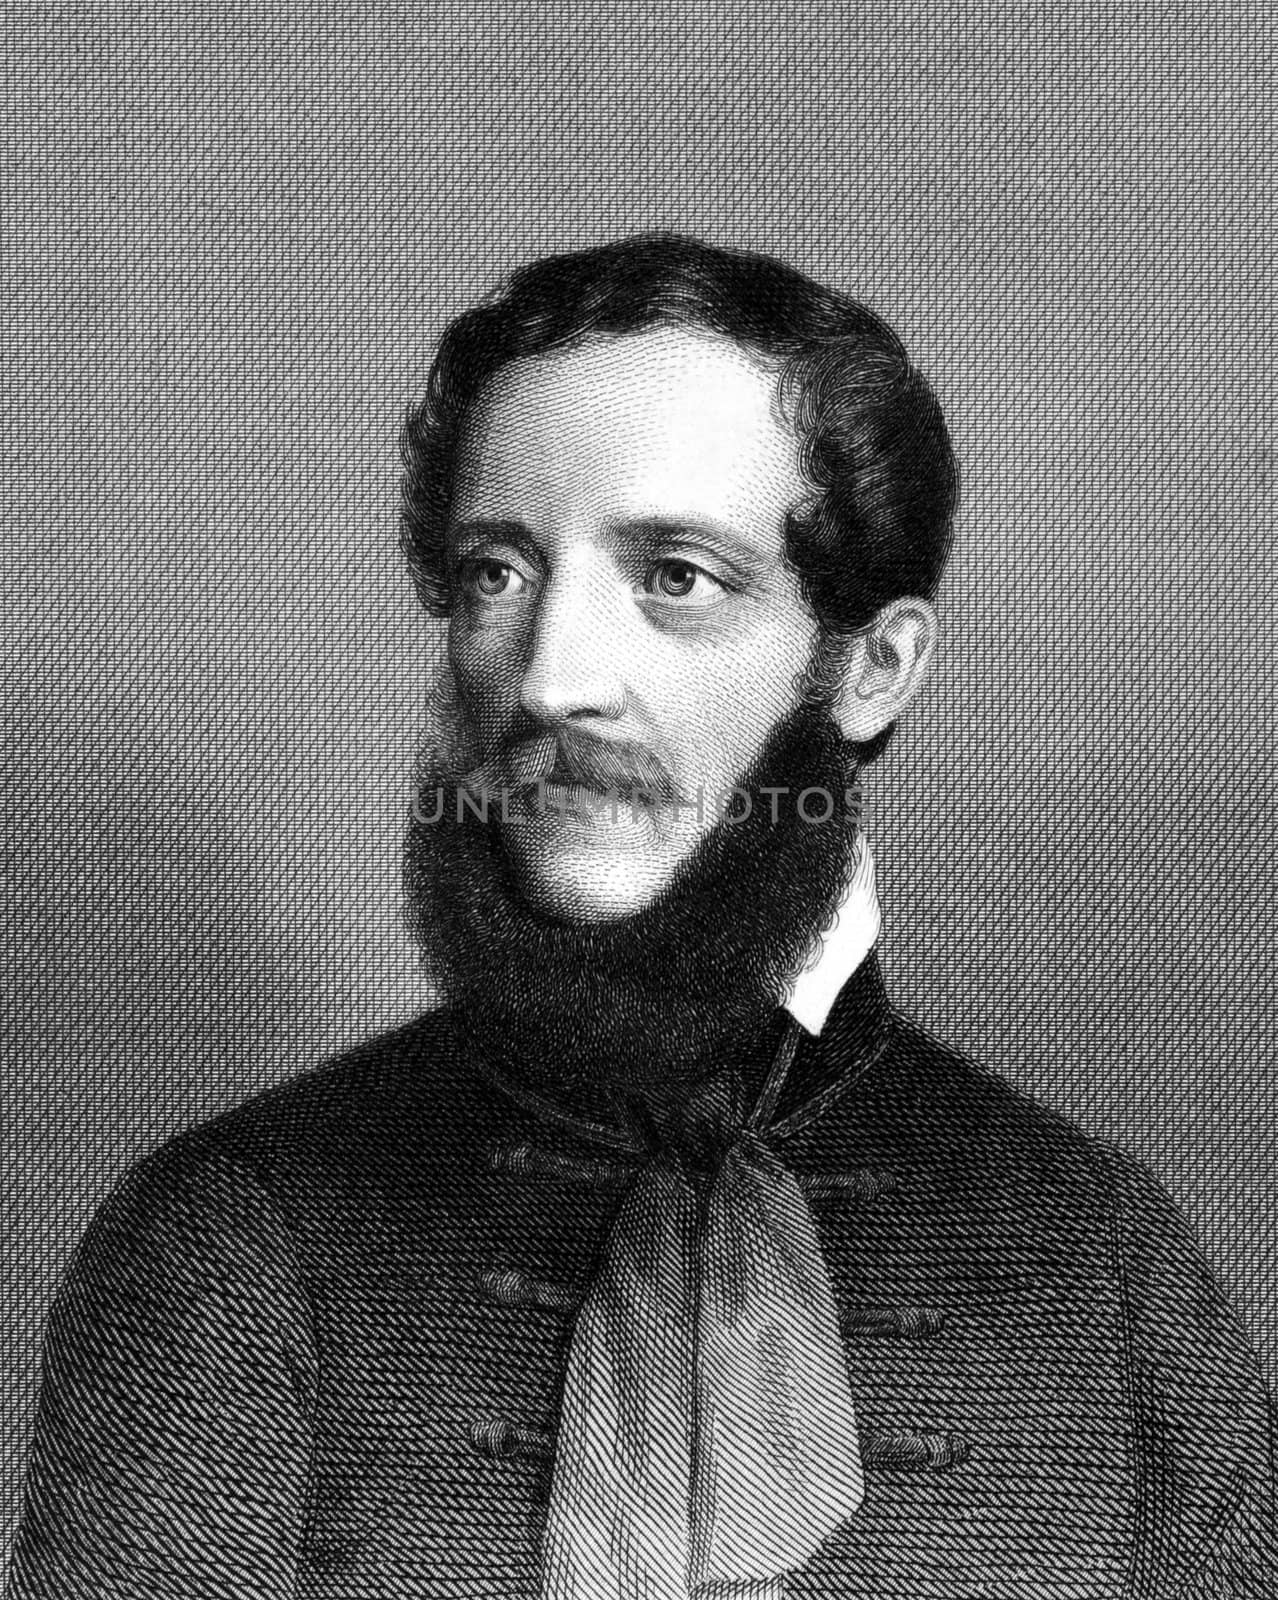 Lajos Kossuth (1802-1894) on engraving from 1859.  Hungarian lawyer, journalist, politician and Regent-President of Hungary in 1849. Engraved by unknown artist and published in Meyers Konversations-Lexikon, Germany,1859.